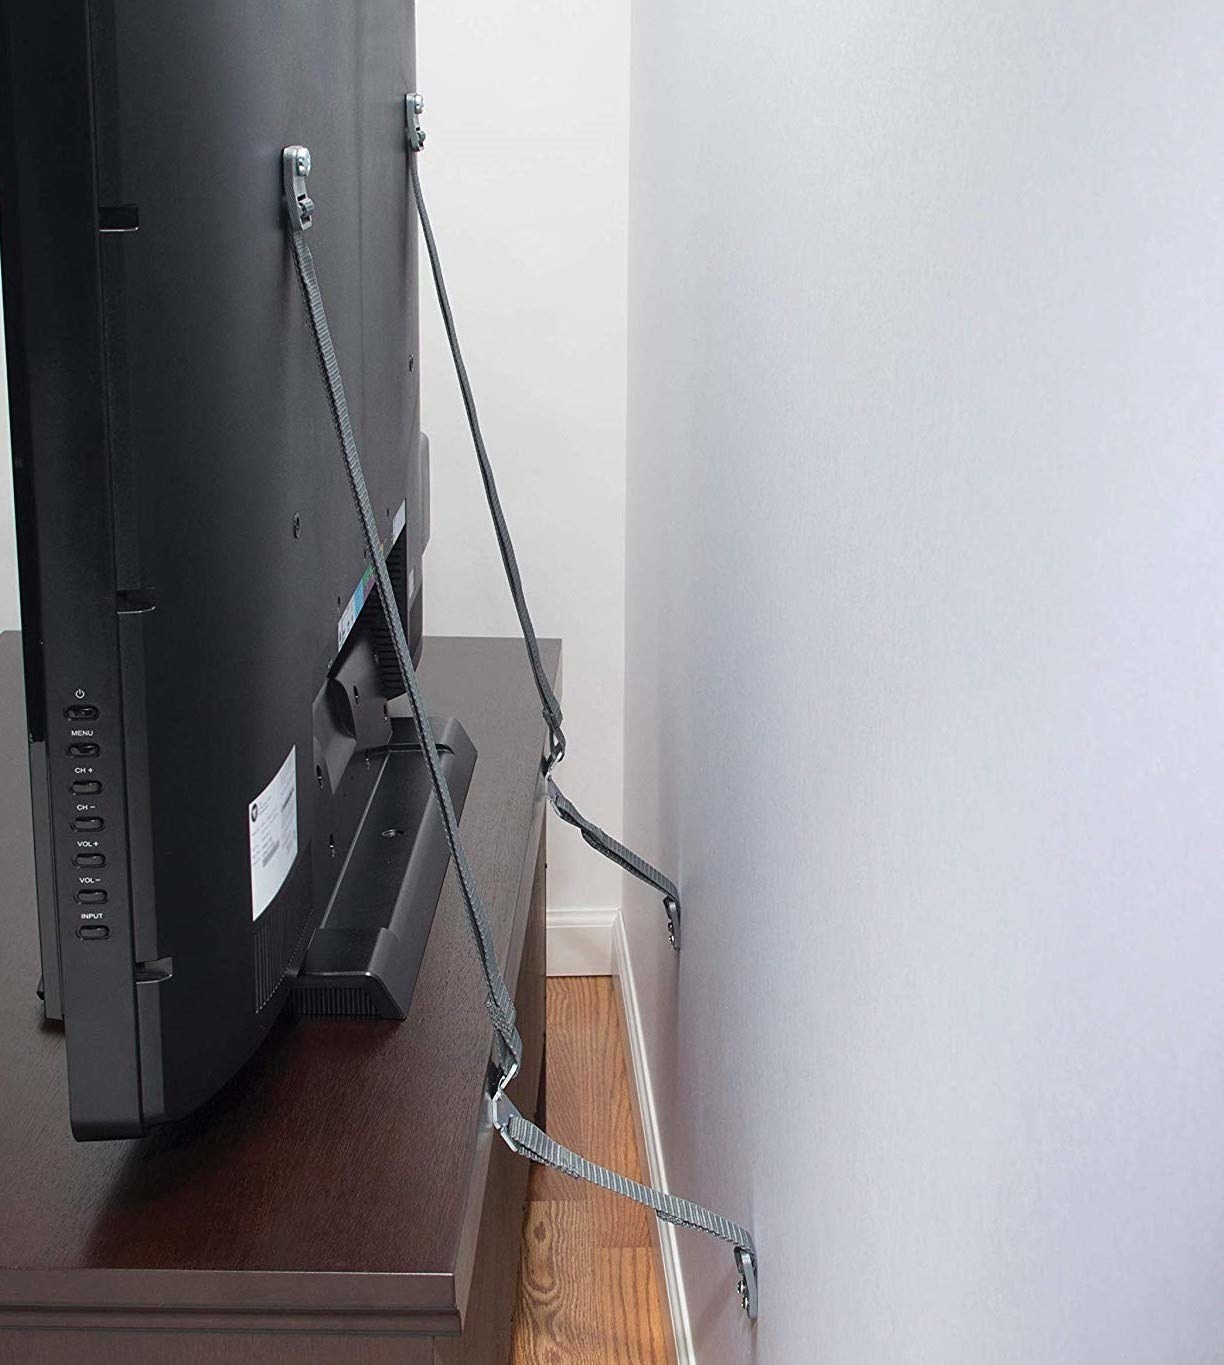 A pair of safety straps securing the TV to the wall